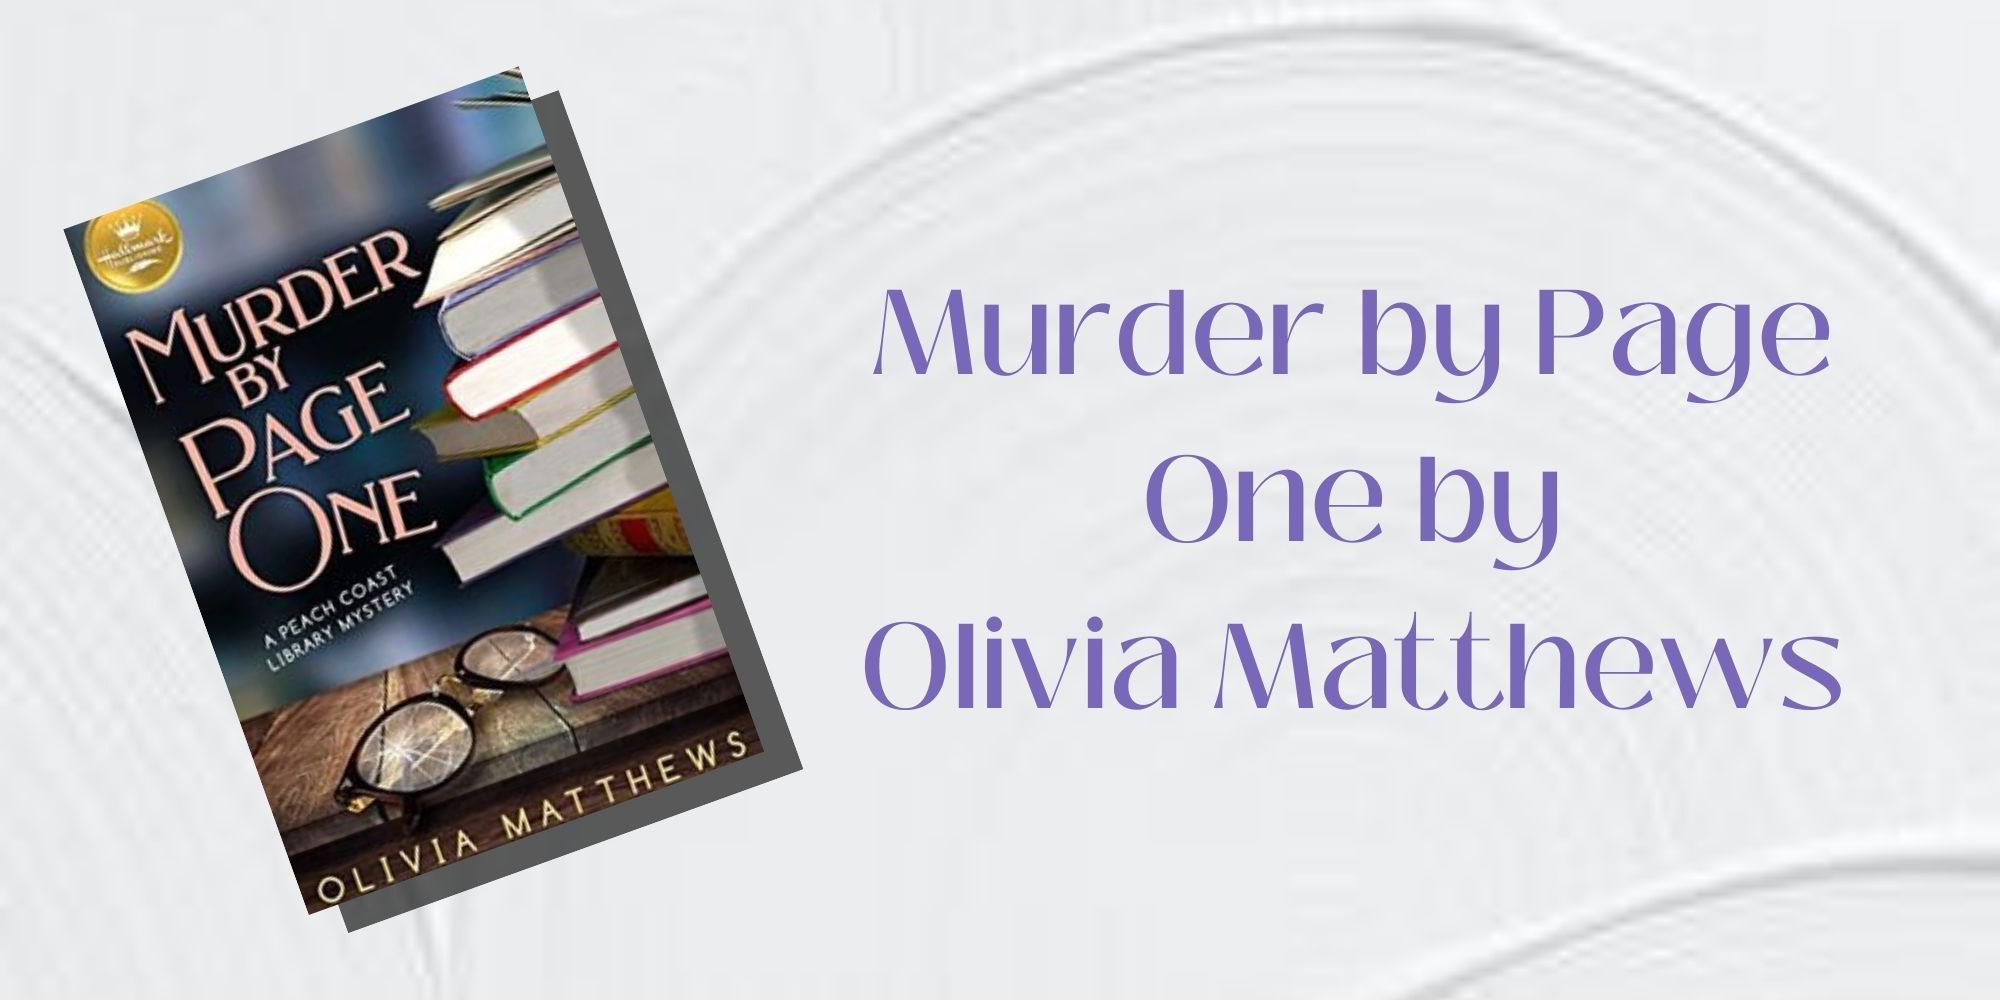 The cover of Murder by Page One by Olivia Matthews